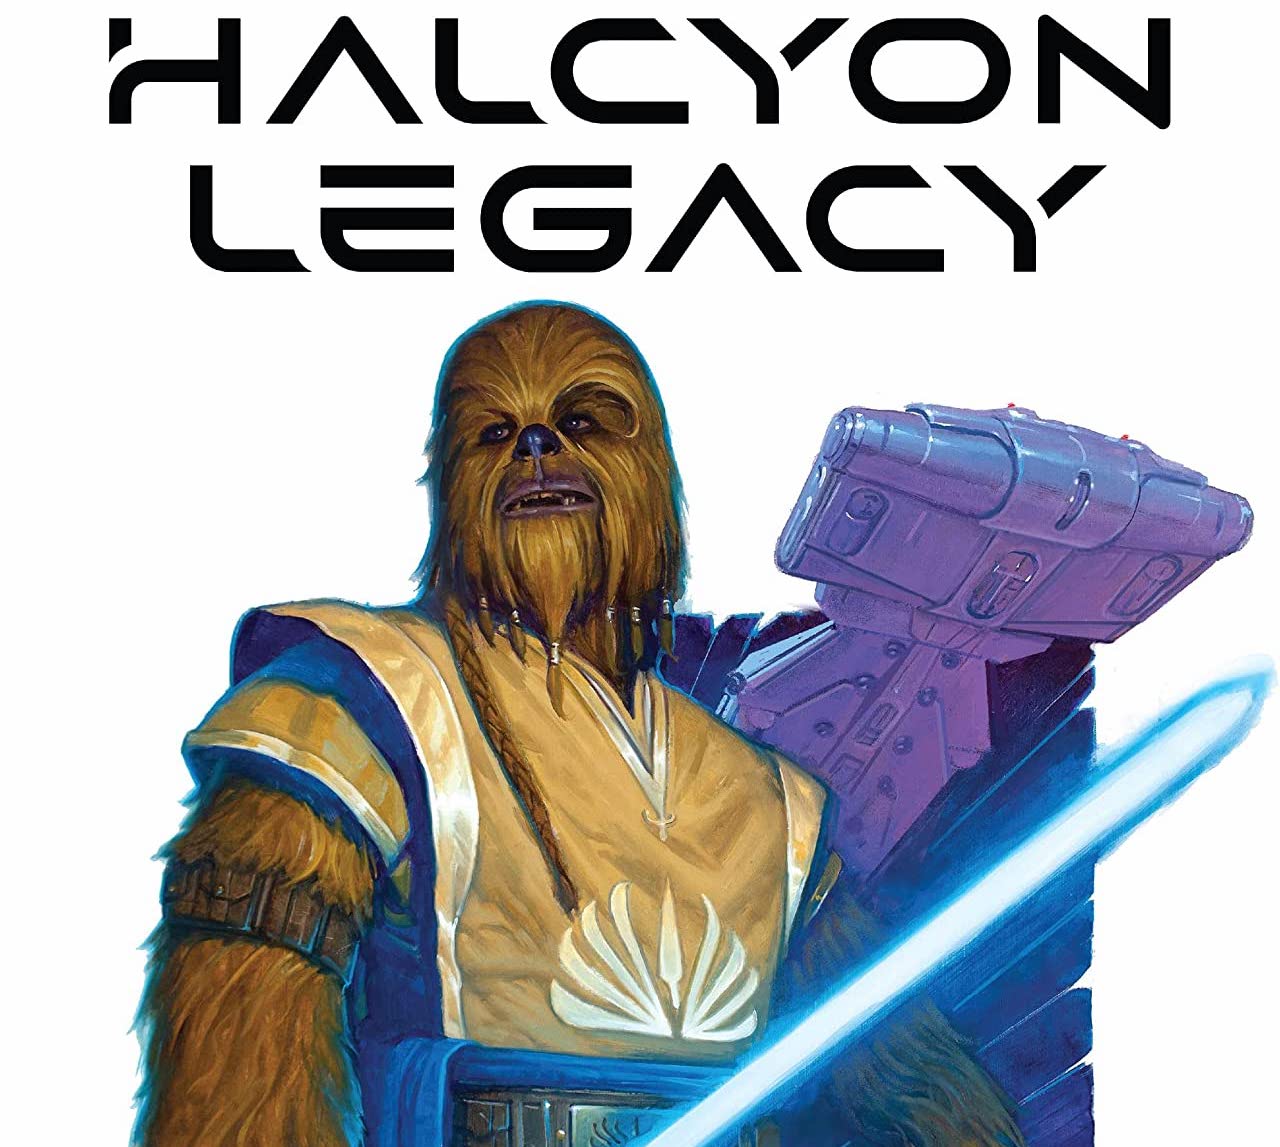 'Star Wars: The Halcyon Legacy' #1 delivers a Galactic Starcruiser experience